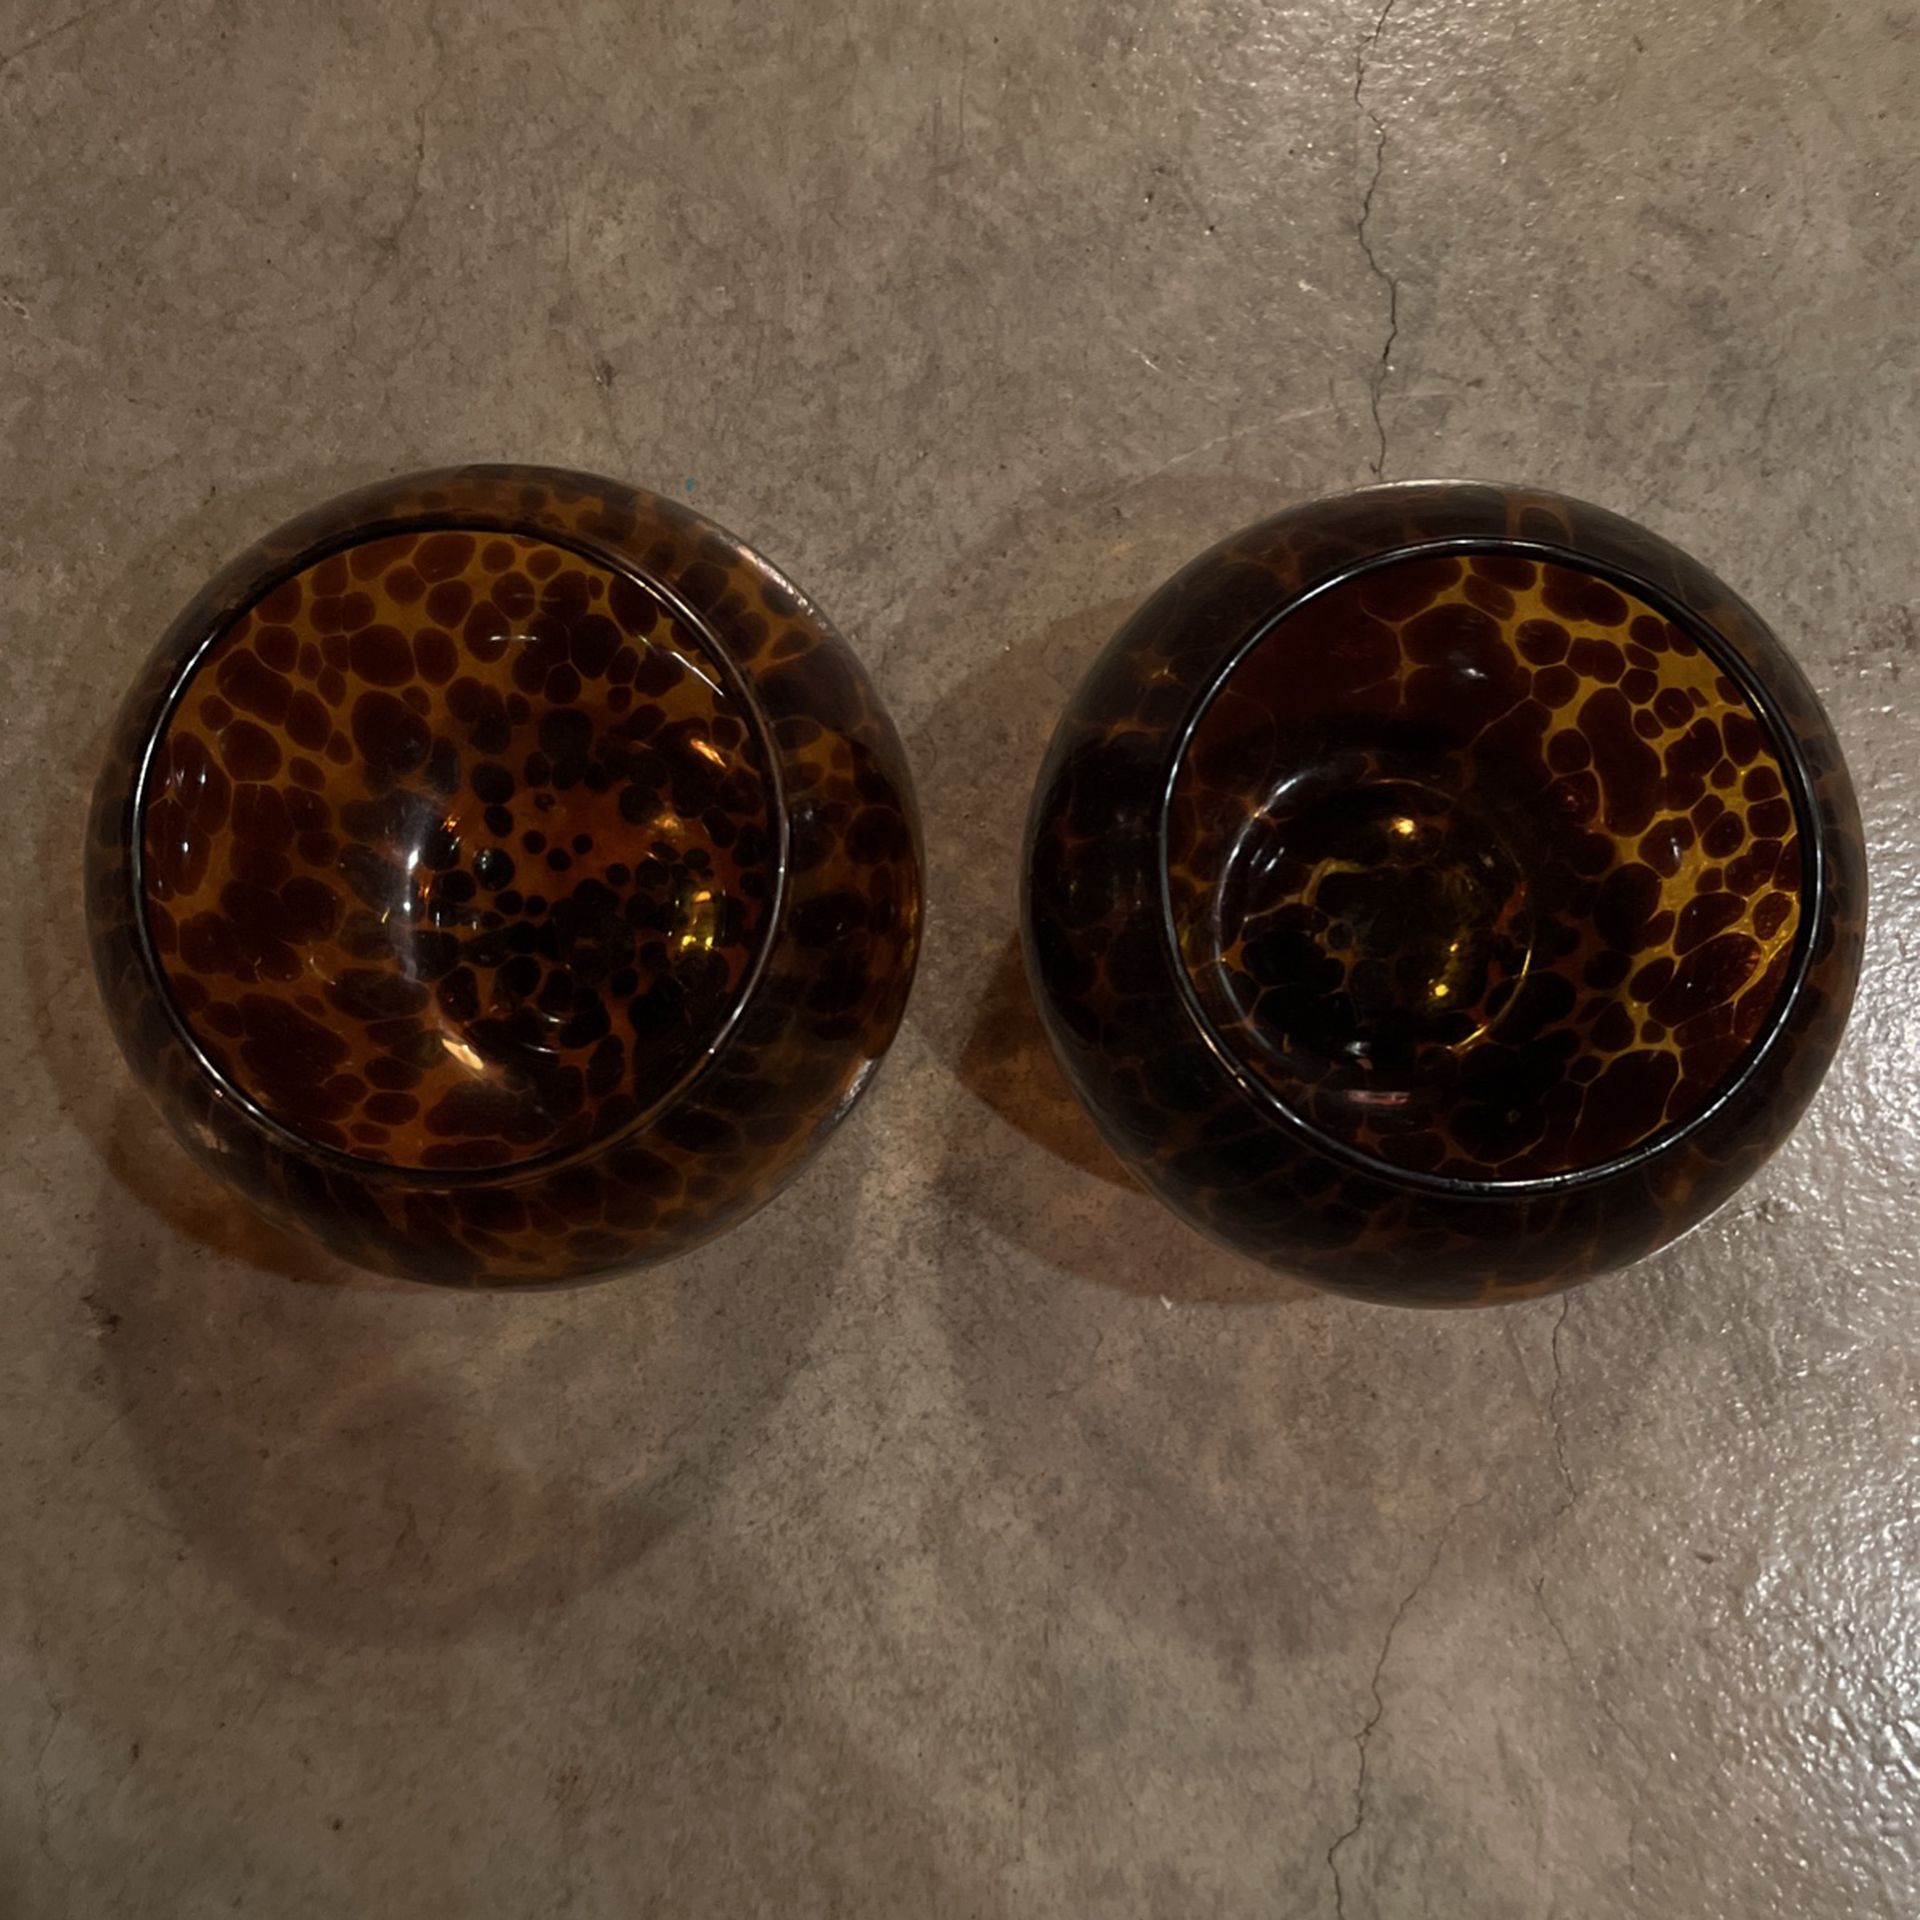 Candle Votive Holders (Qty 2)